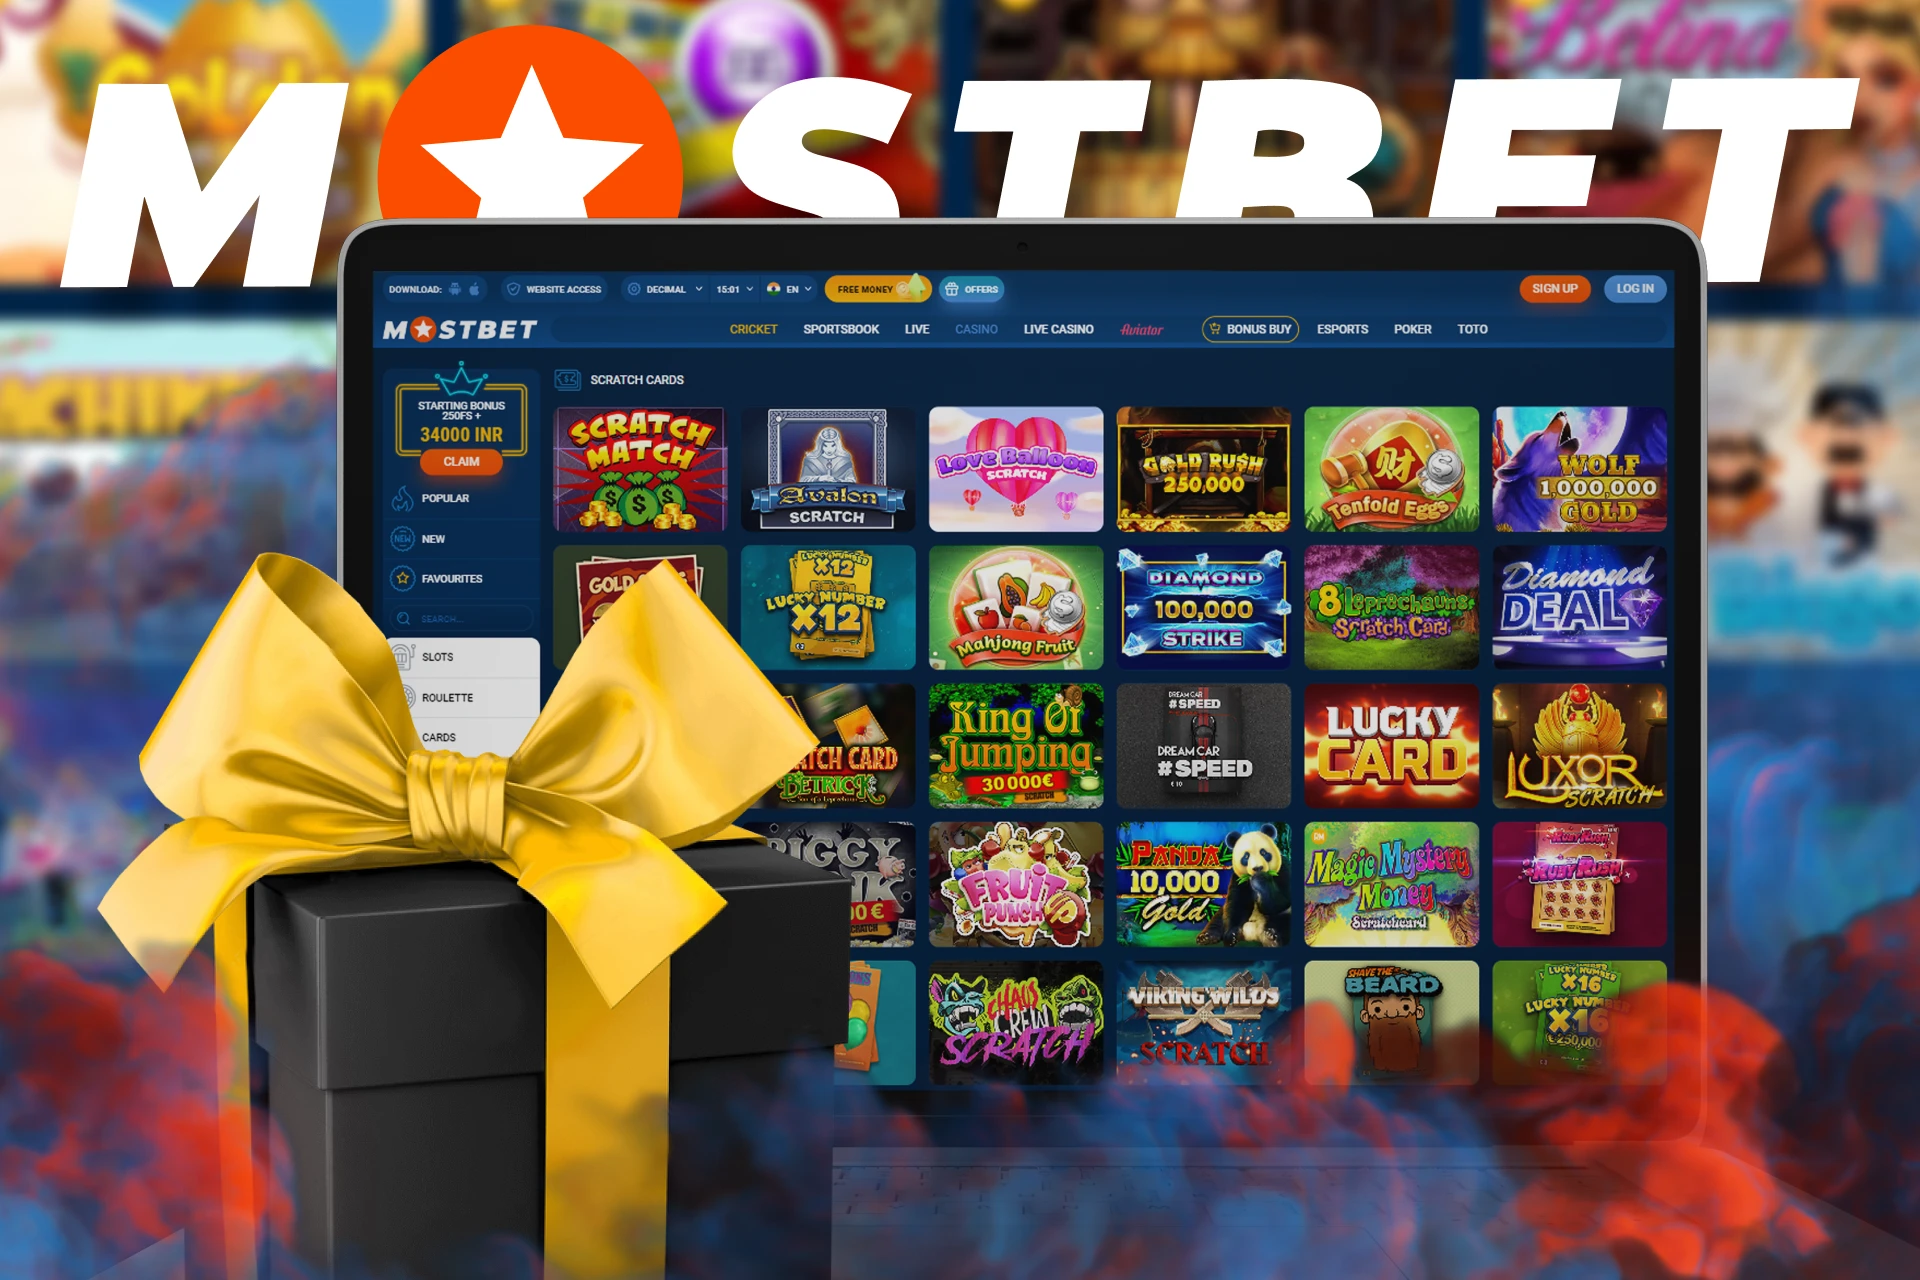 Get a nice bonus for playing the lottery and betting at Mostbet.